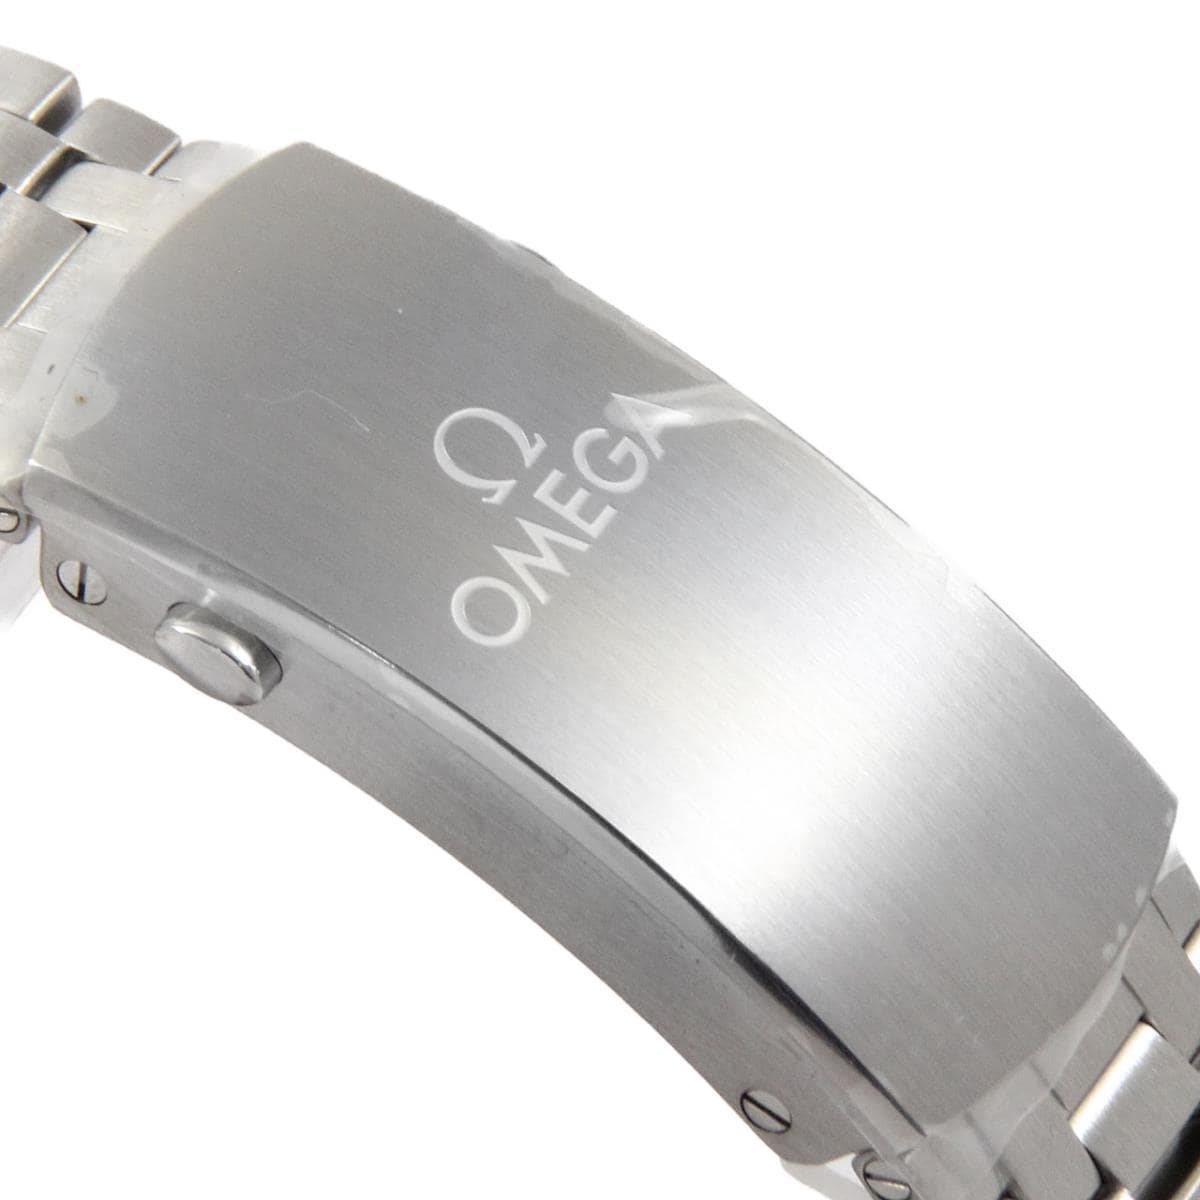 [BRAND NEW] Omega 210.30.42.20.06.001 Seamaster Diver 300M Automatic